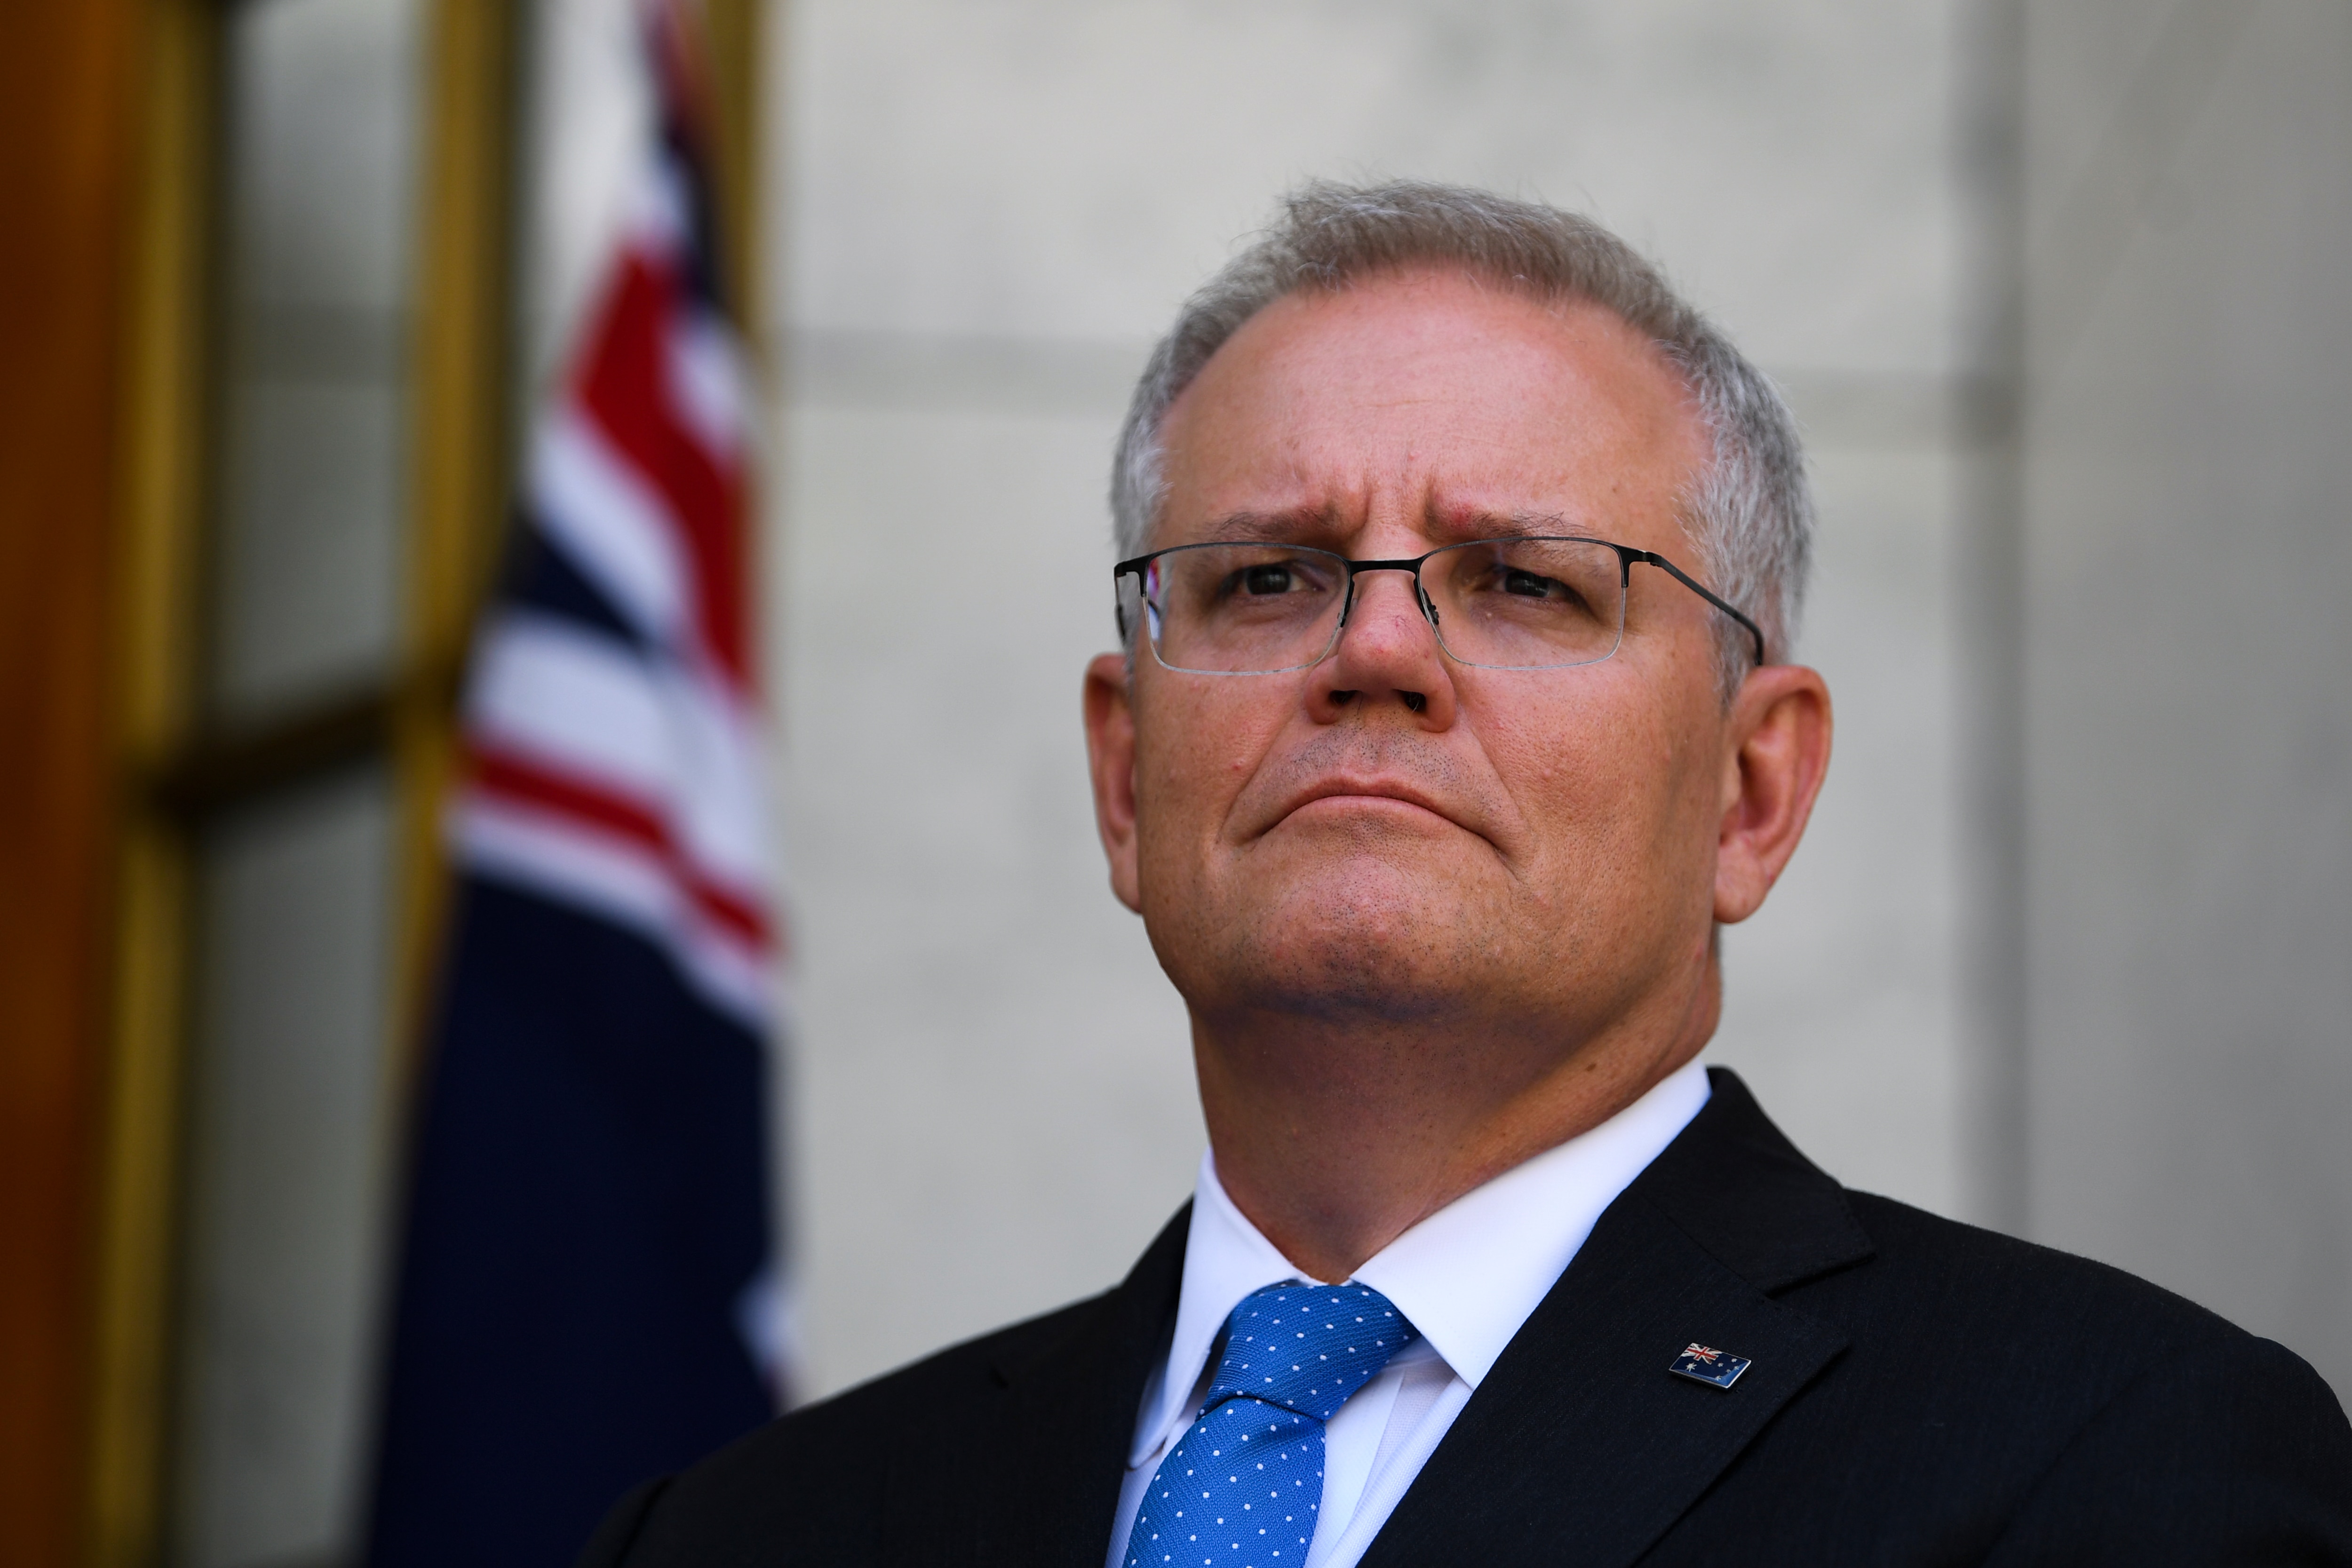 Prime Minister Scott Morrison speaks to the media during press conference at Parliament House in Canberra.